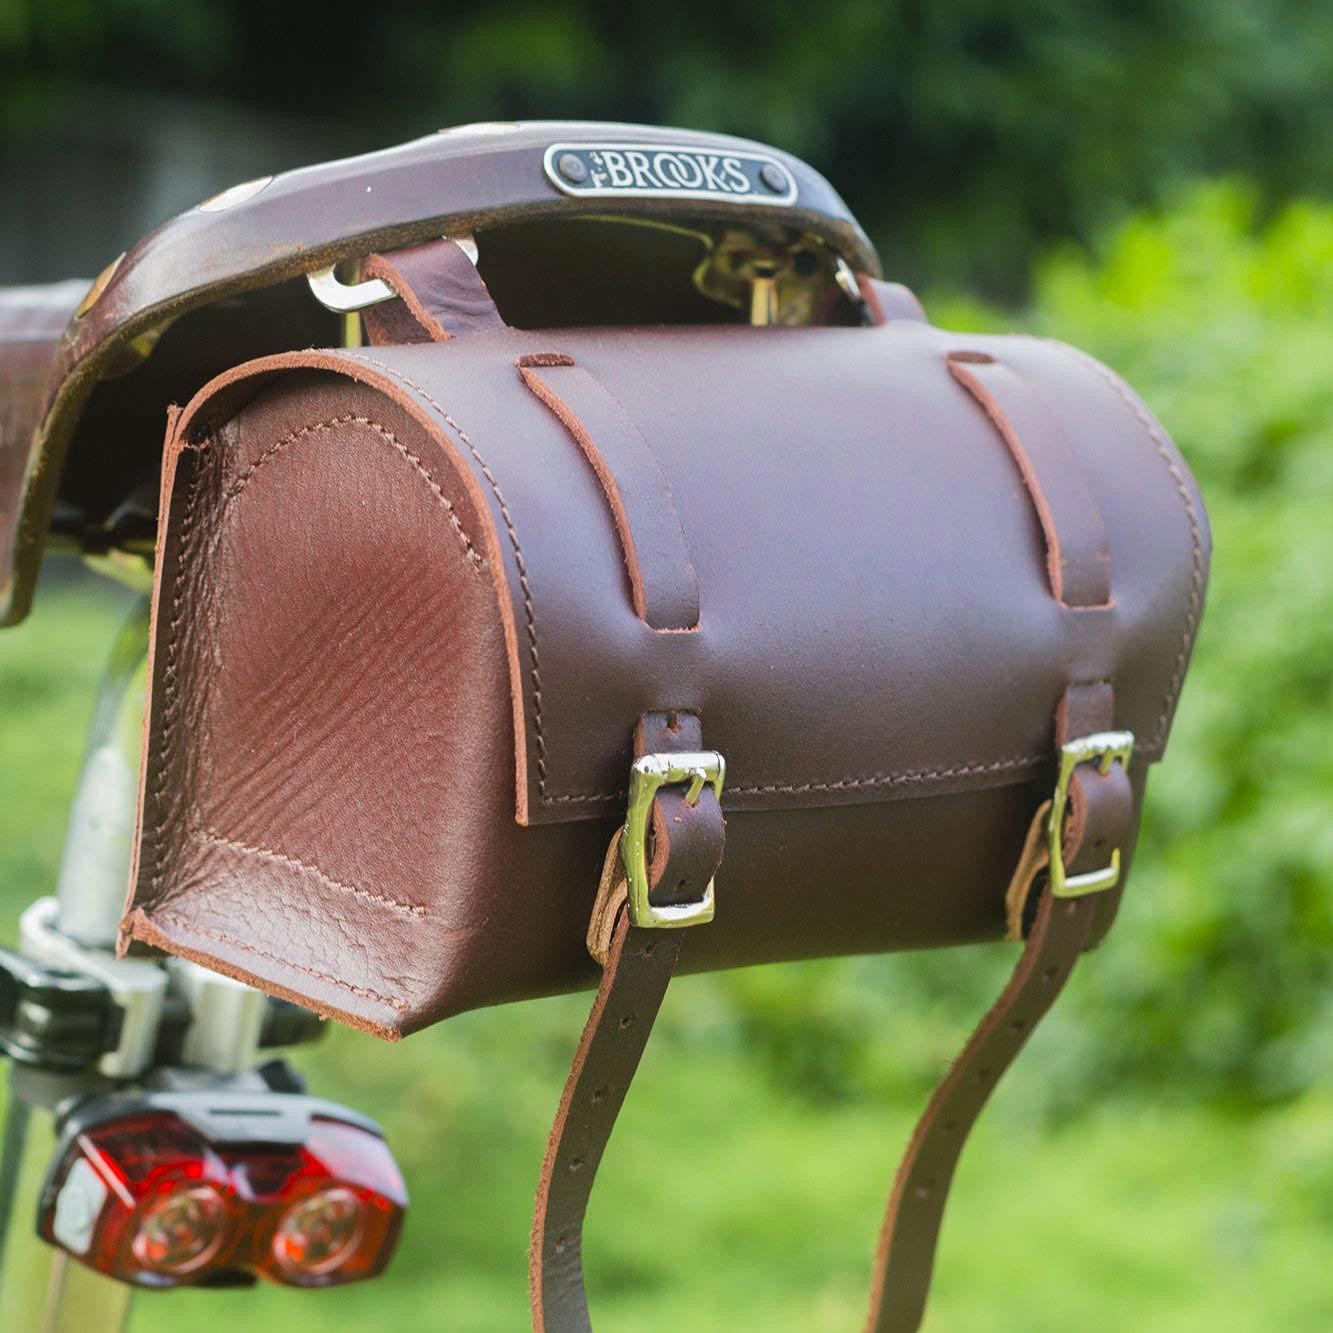 Handmade Bourbon Brown Leather Frame Bag for Bicycle/Triangular/Bike/Tool Pouch/Accessories/Biker Essentials Hide & Drink